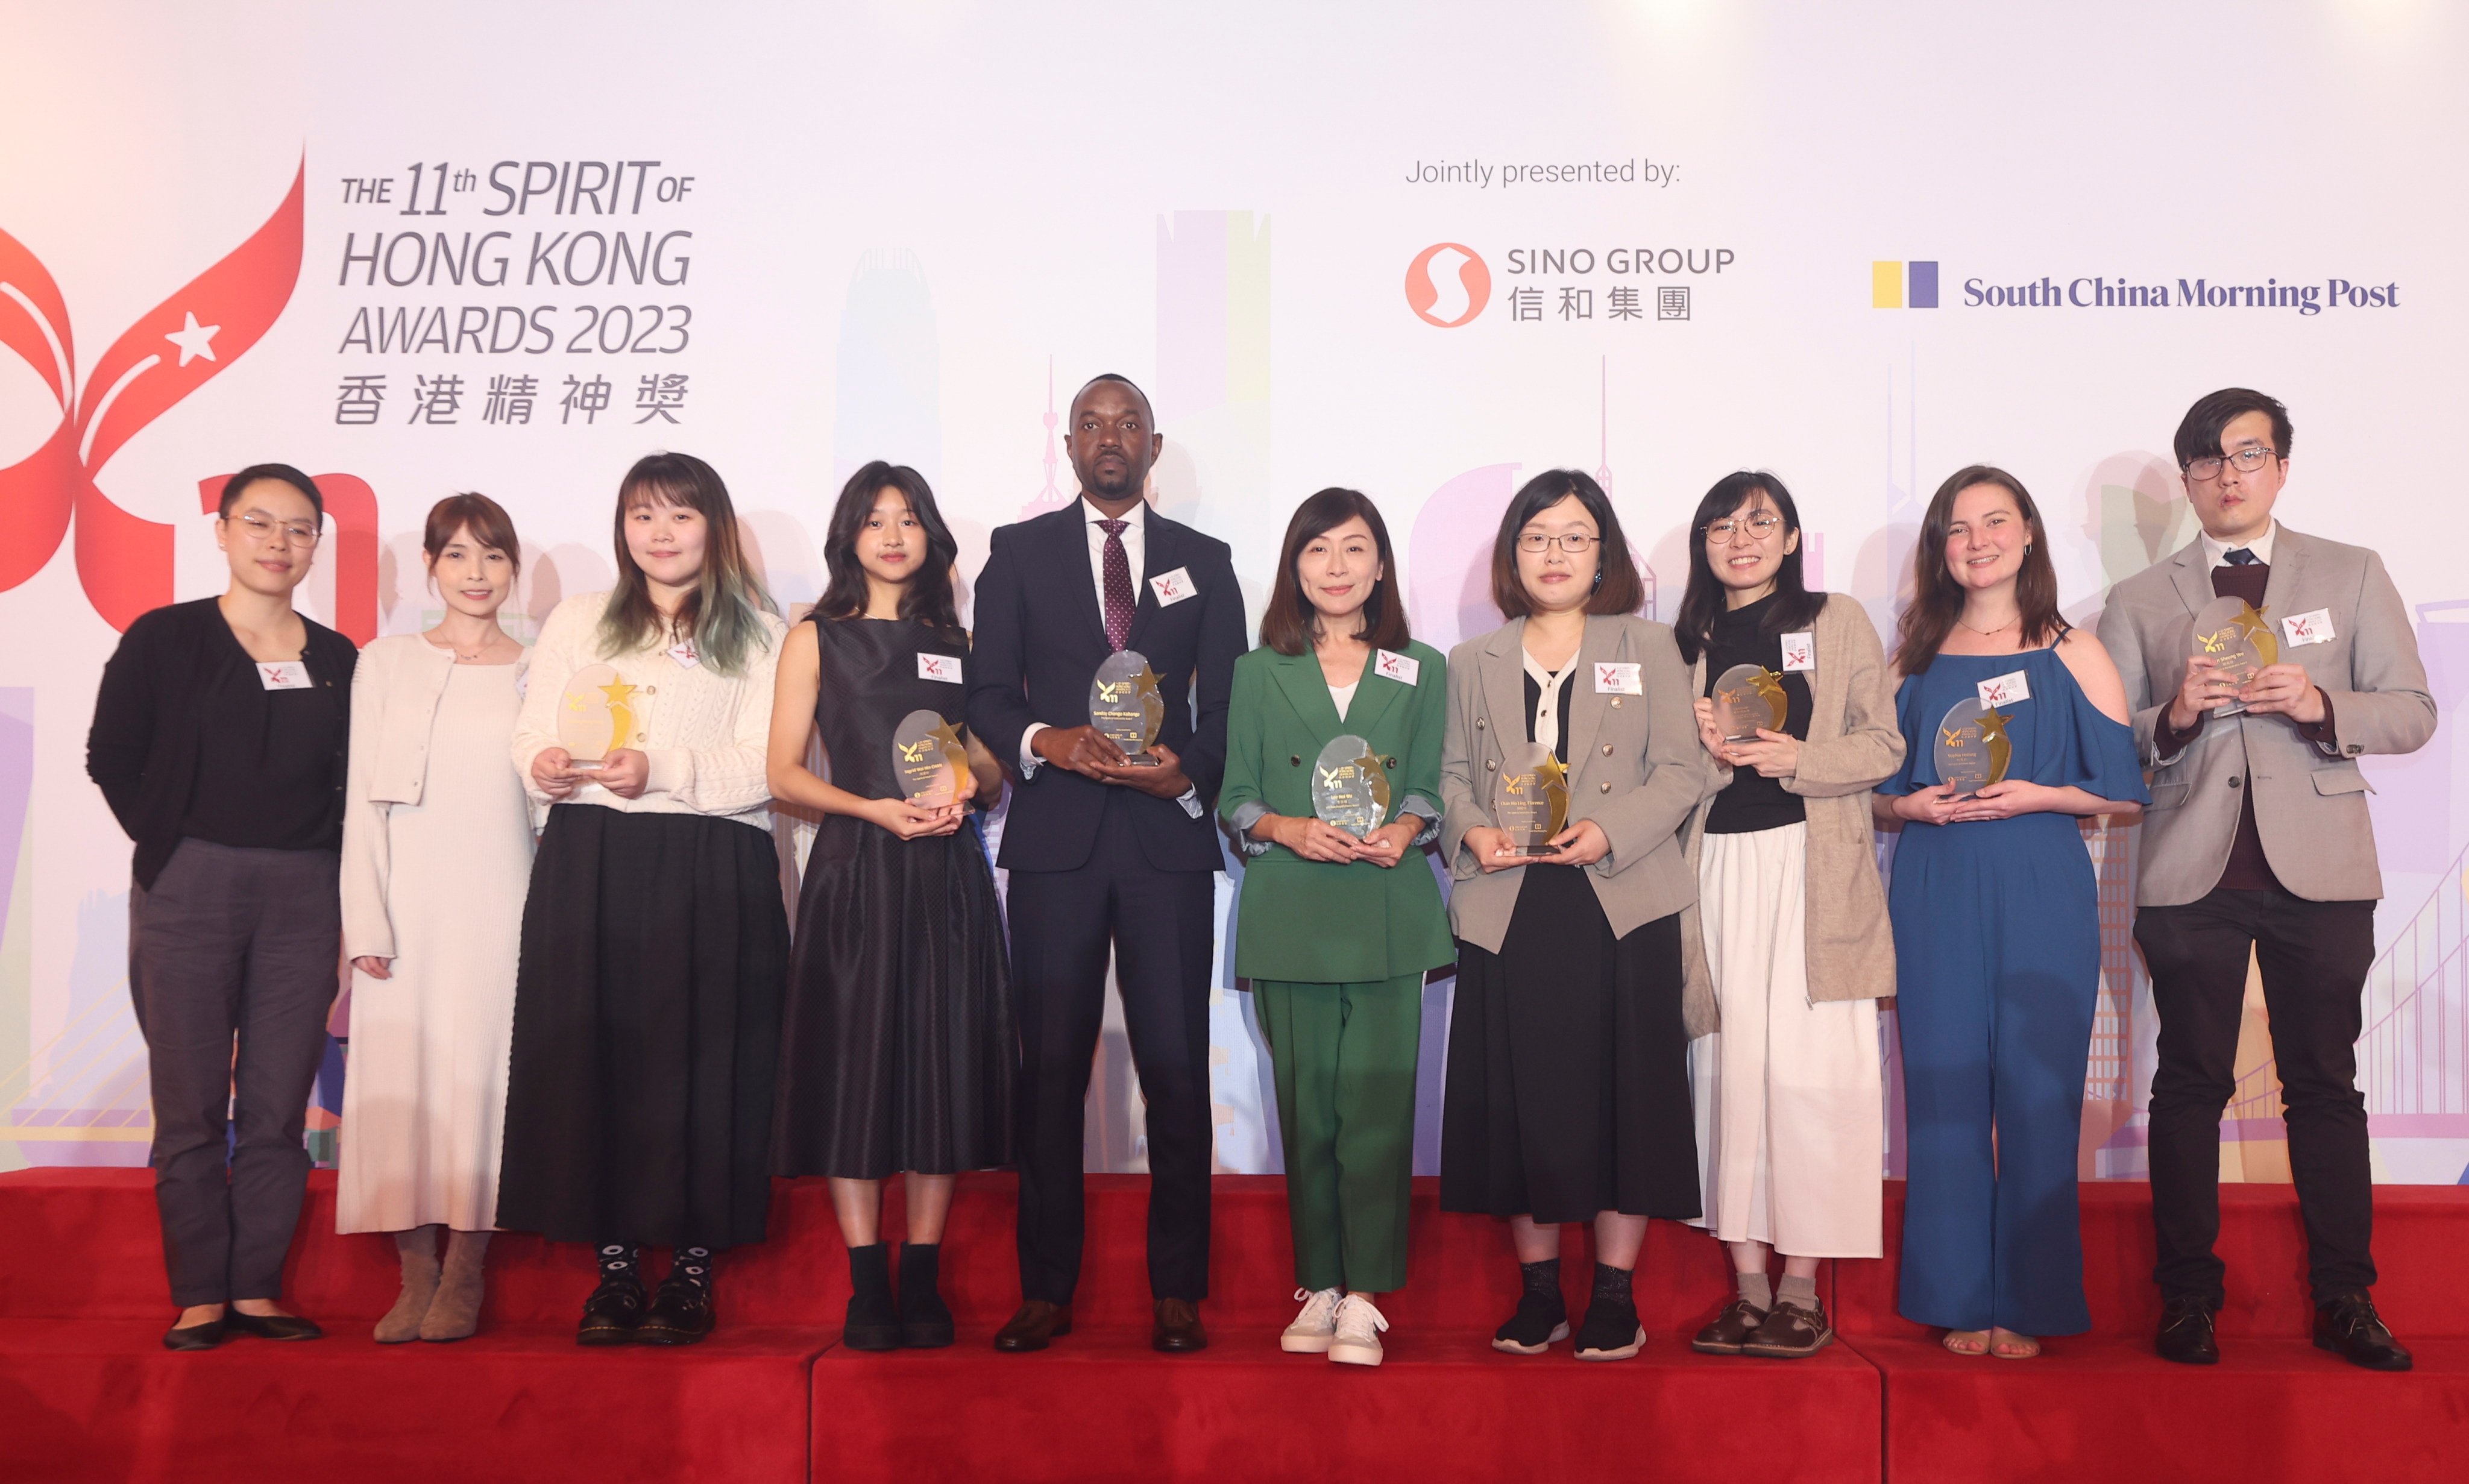 The winners of this year’s Spirit of Hong Kong awards. Photo: Edmond So 

